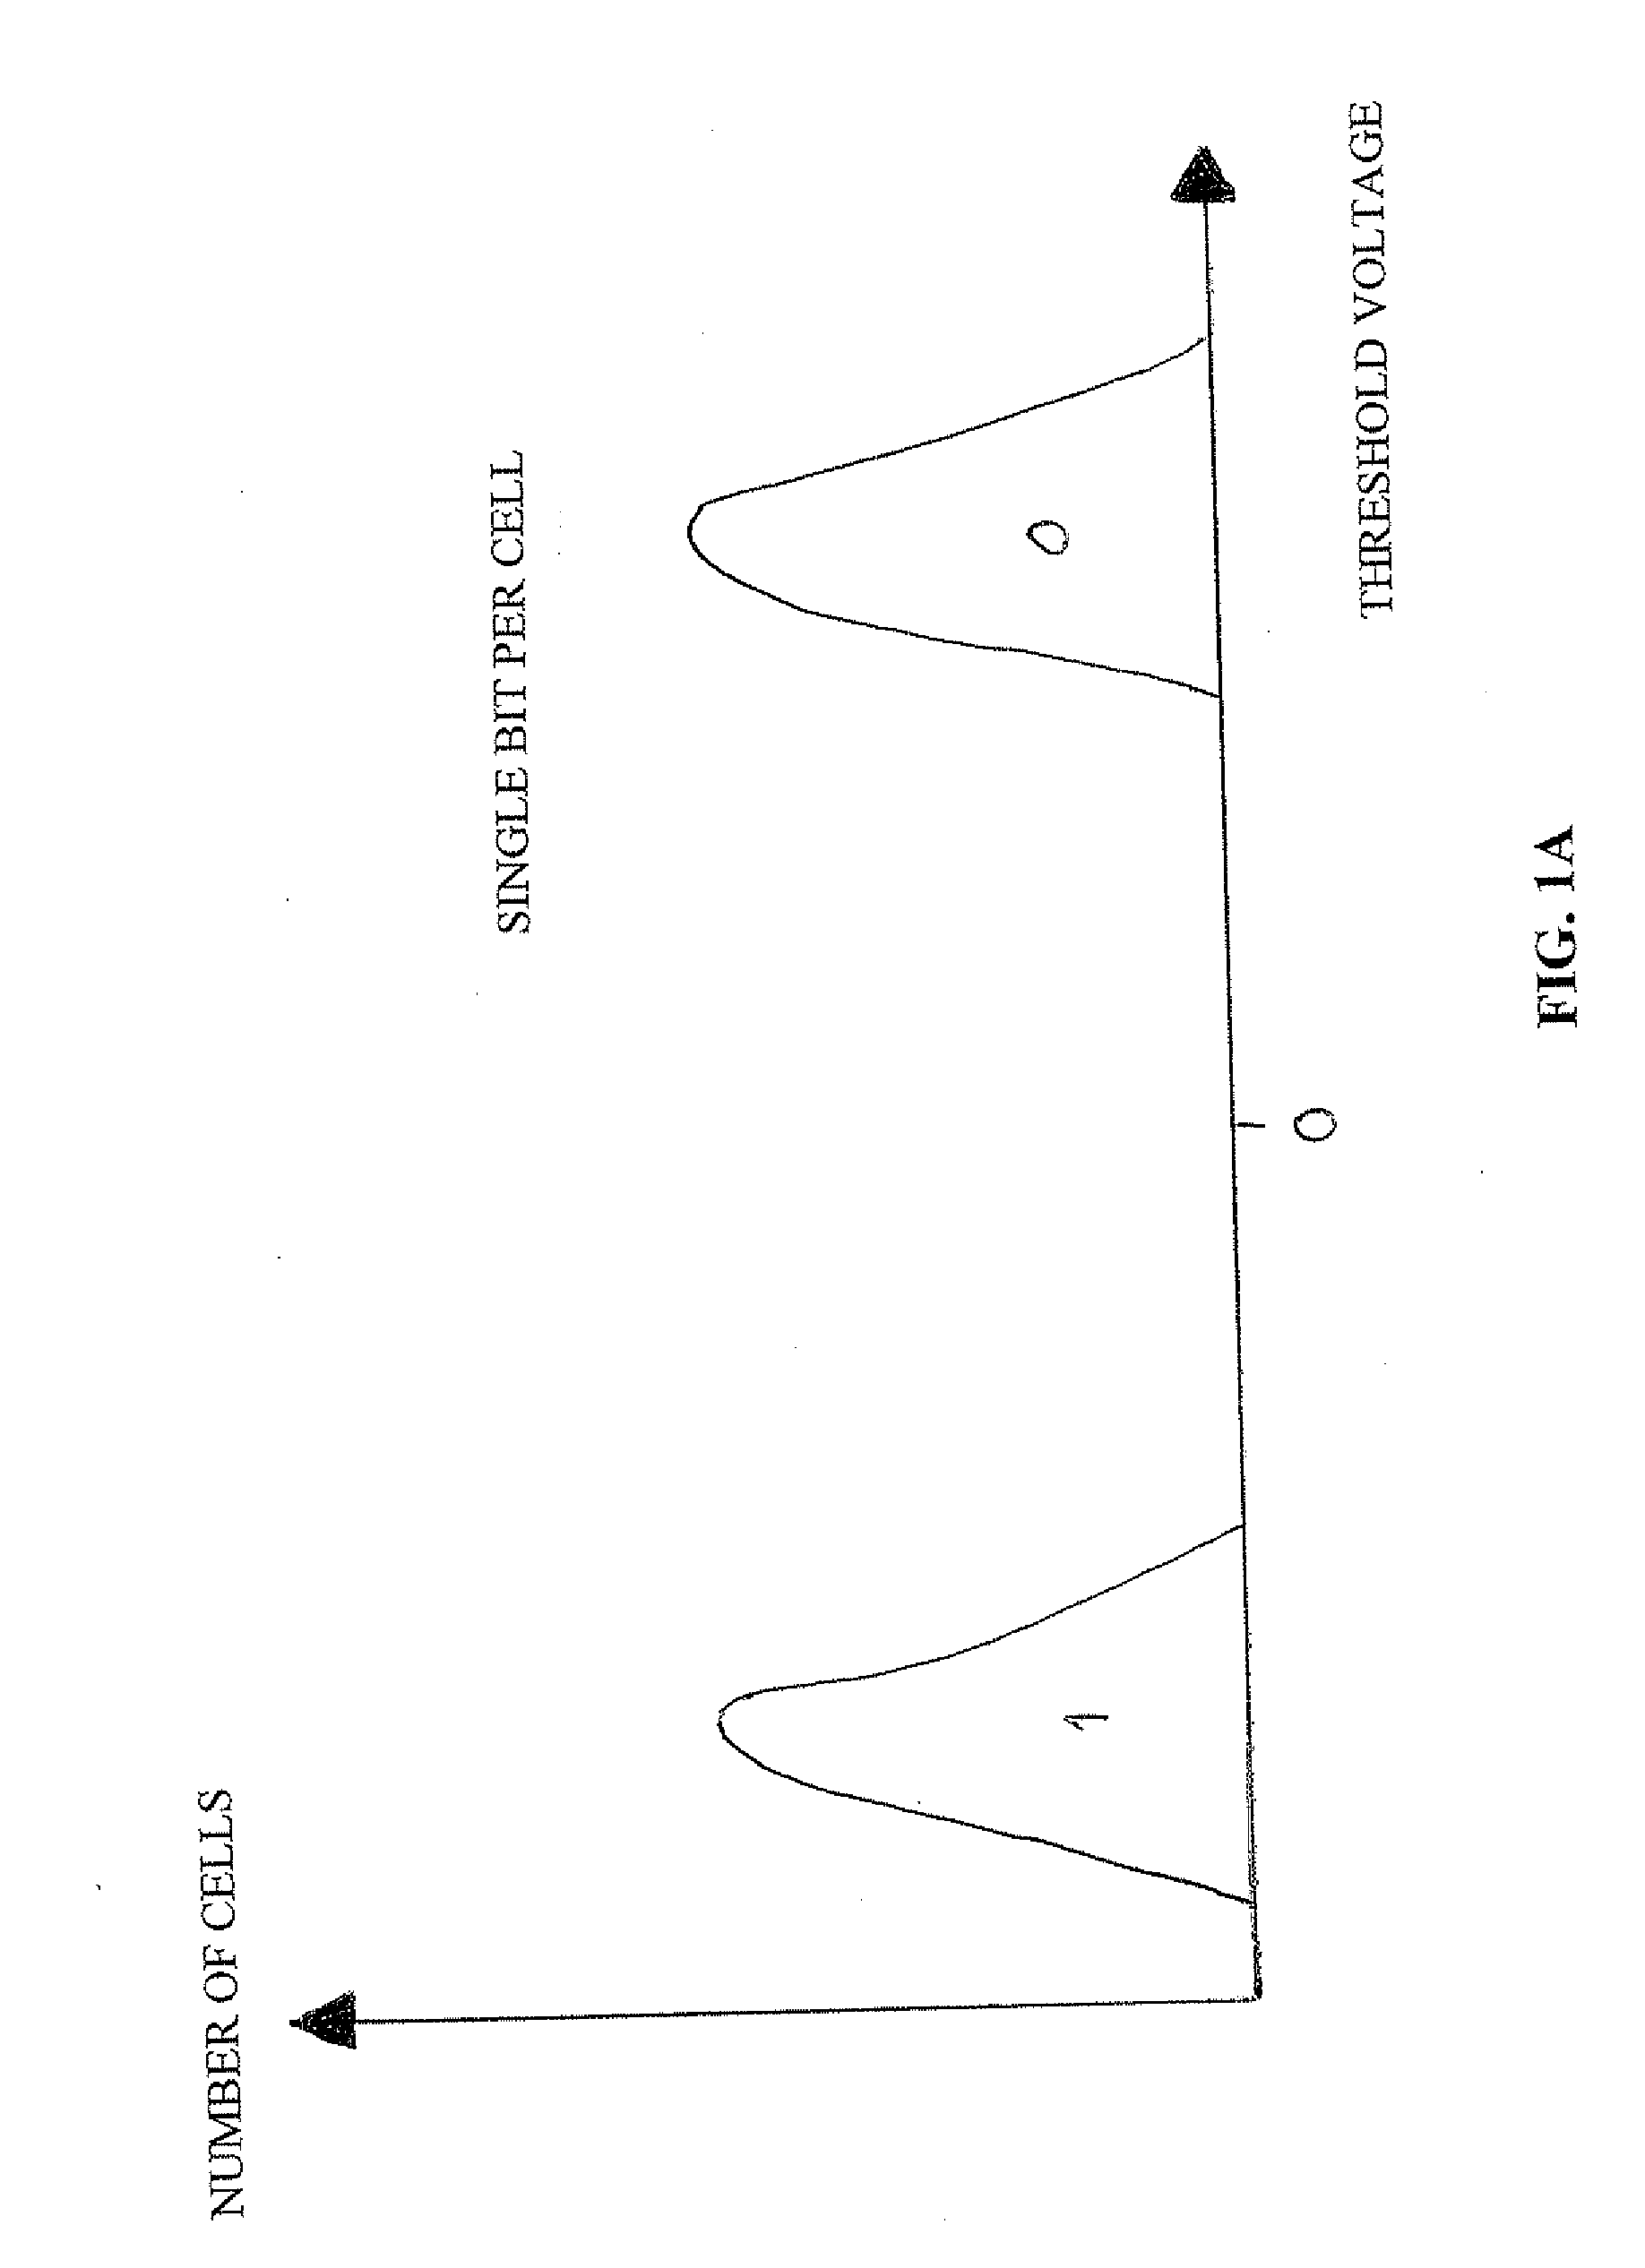 NAND flash memory controller exporting a logical sector-based interface